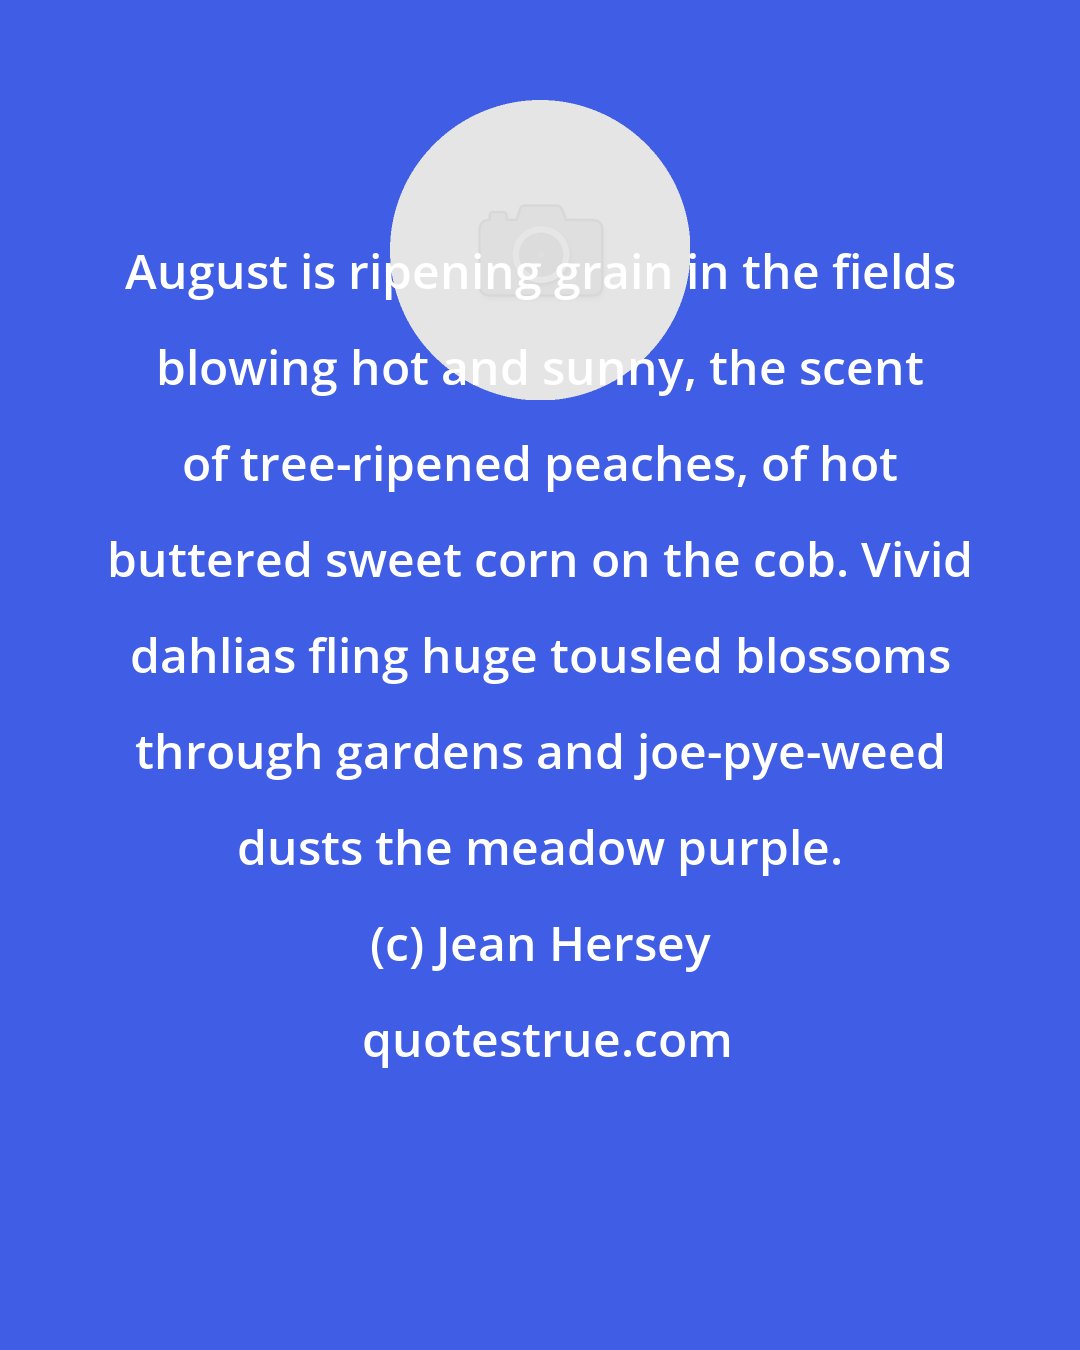 Jean Hersey: August is ripening grain in the fields blowing hot and sunny, the scent of tree-ripened peaches, of hot buttered sweet corn on the cob. Vivid dahlias fling huge tousled blossoms through gardens and joe-pye-weed dusts the meadow purple.